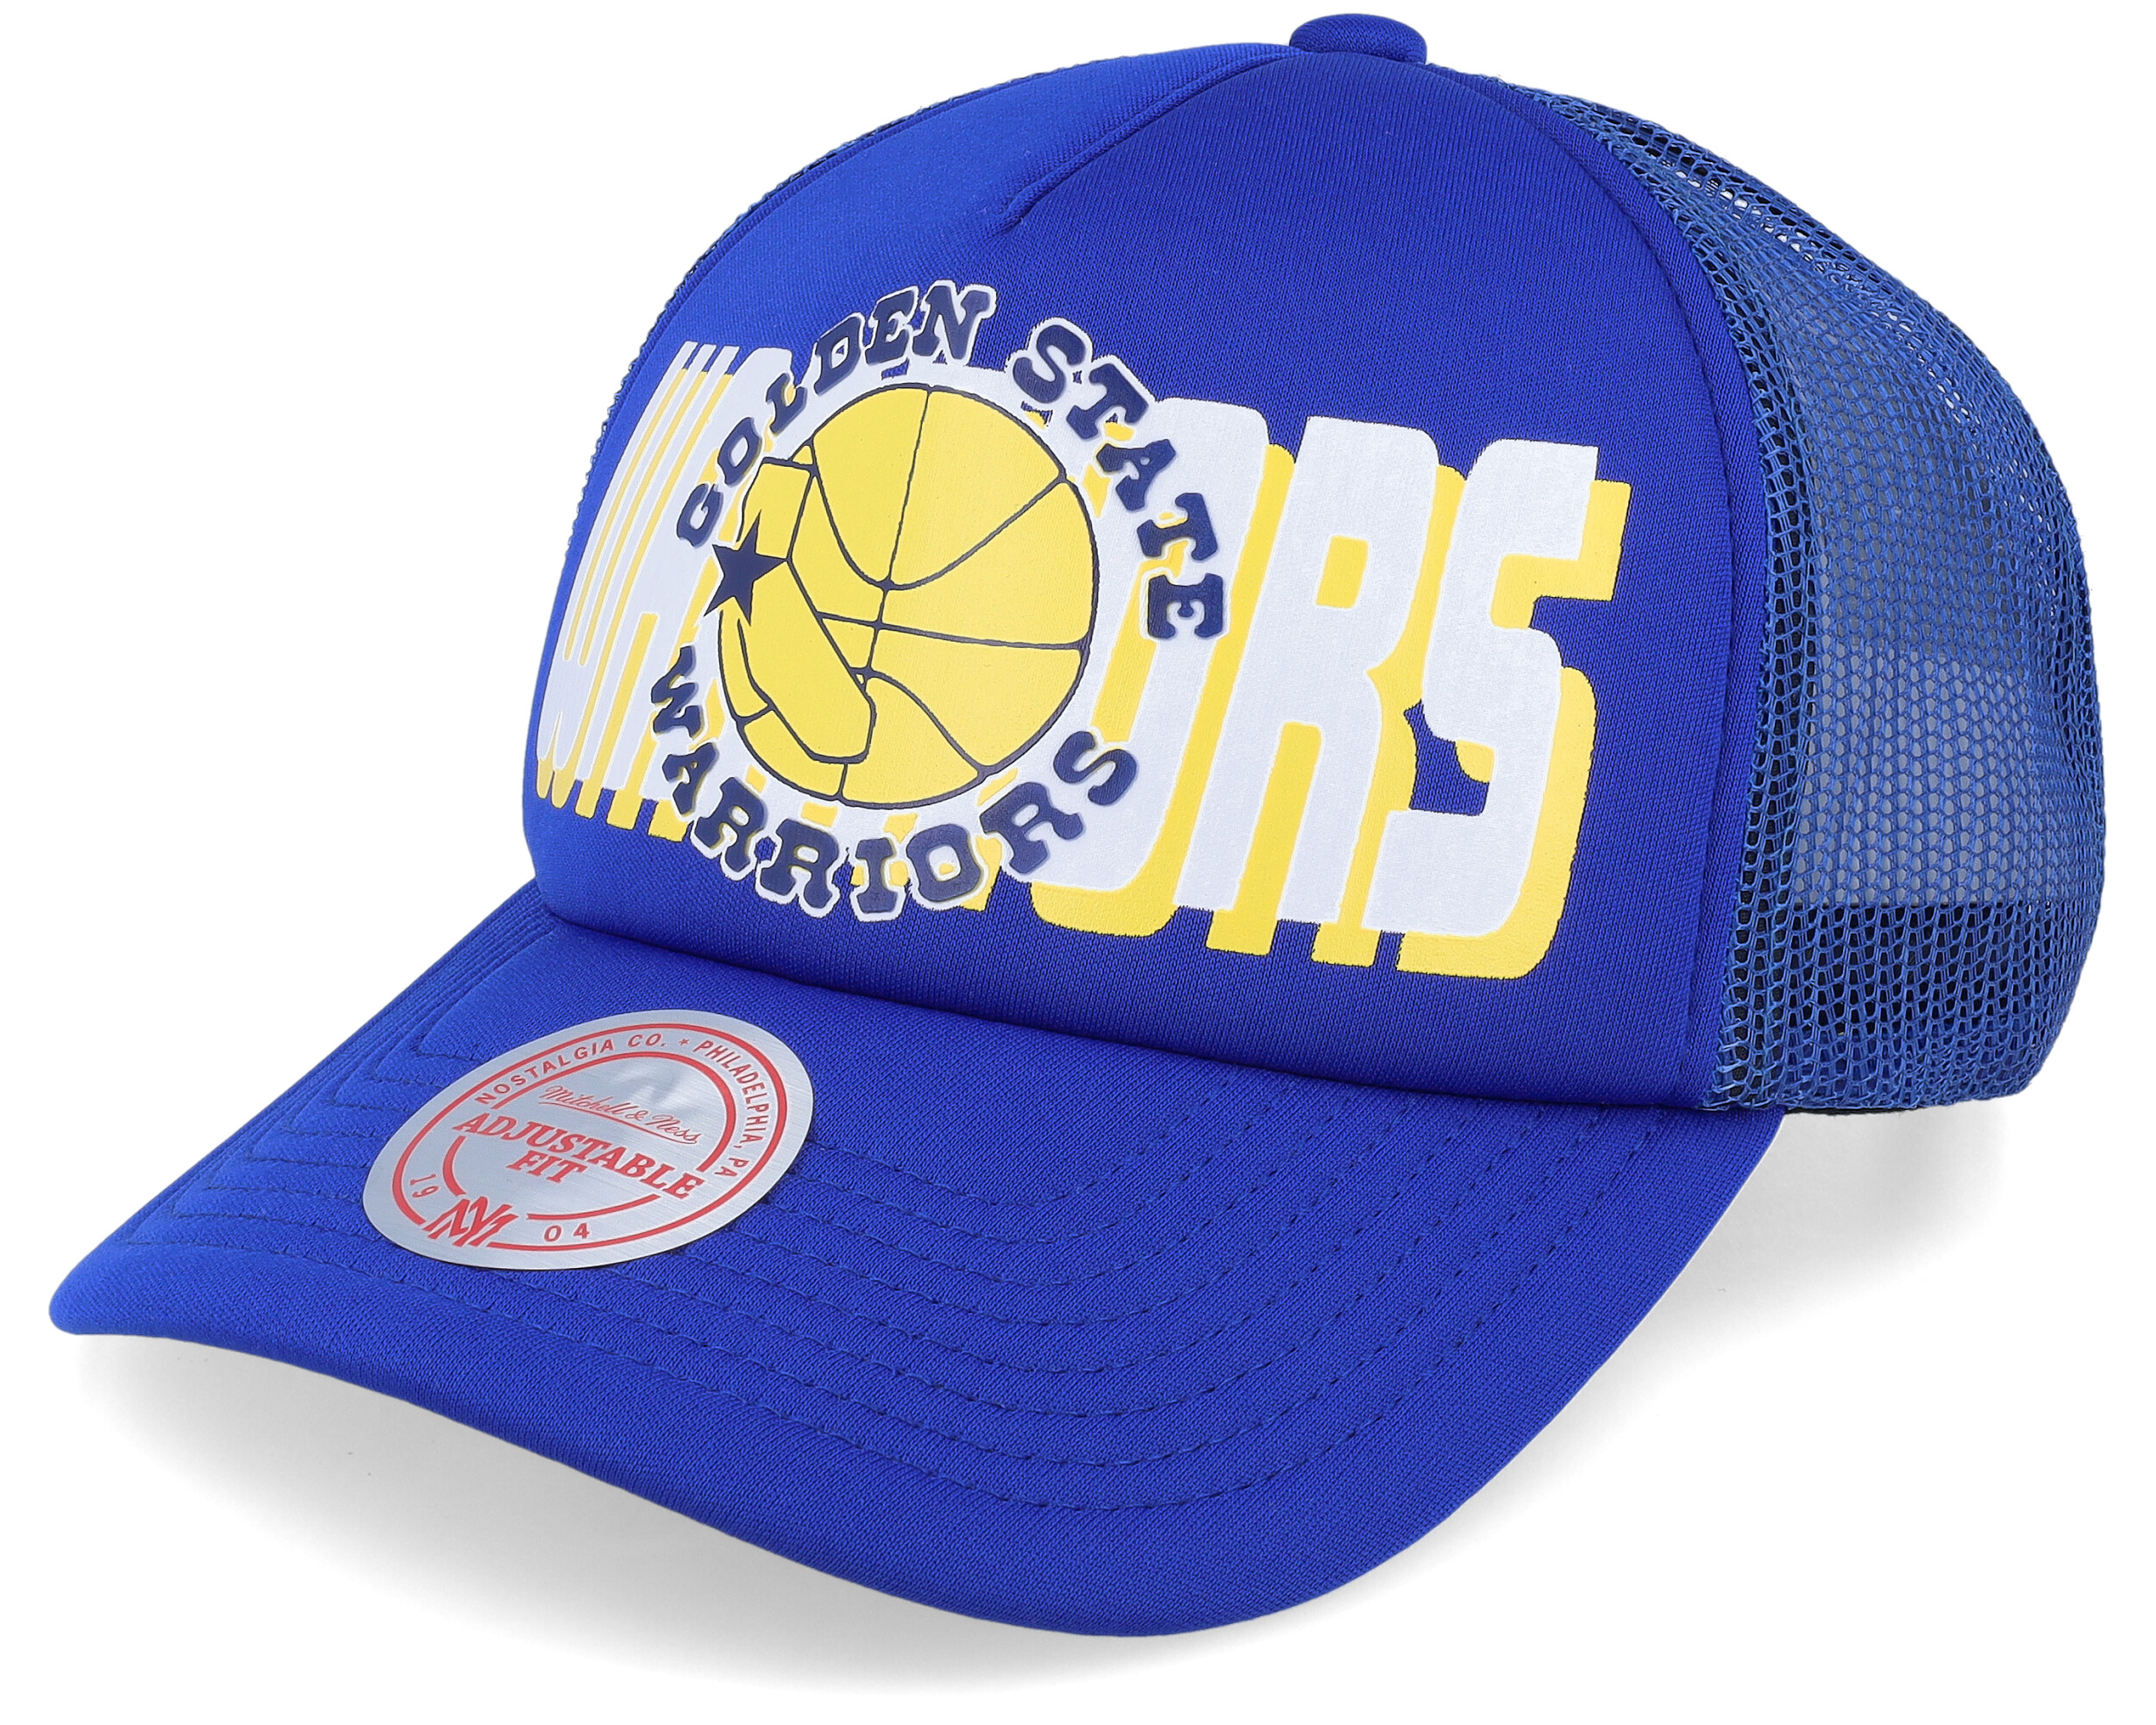 mitchell and ness golden state warriors cap